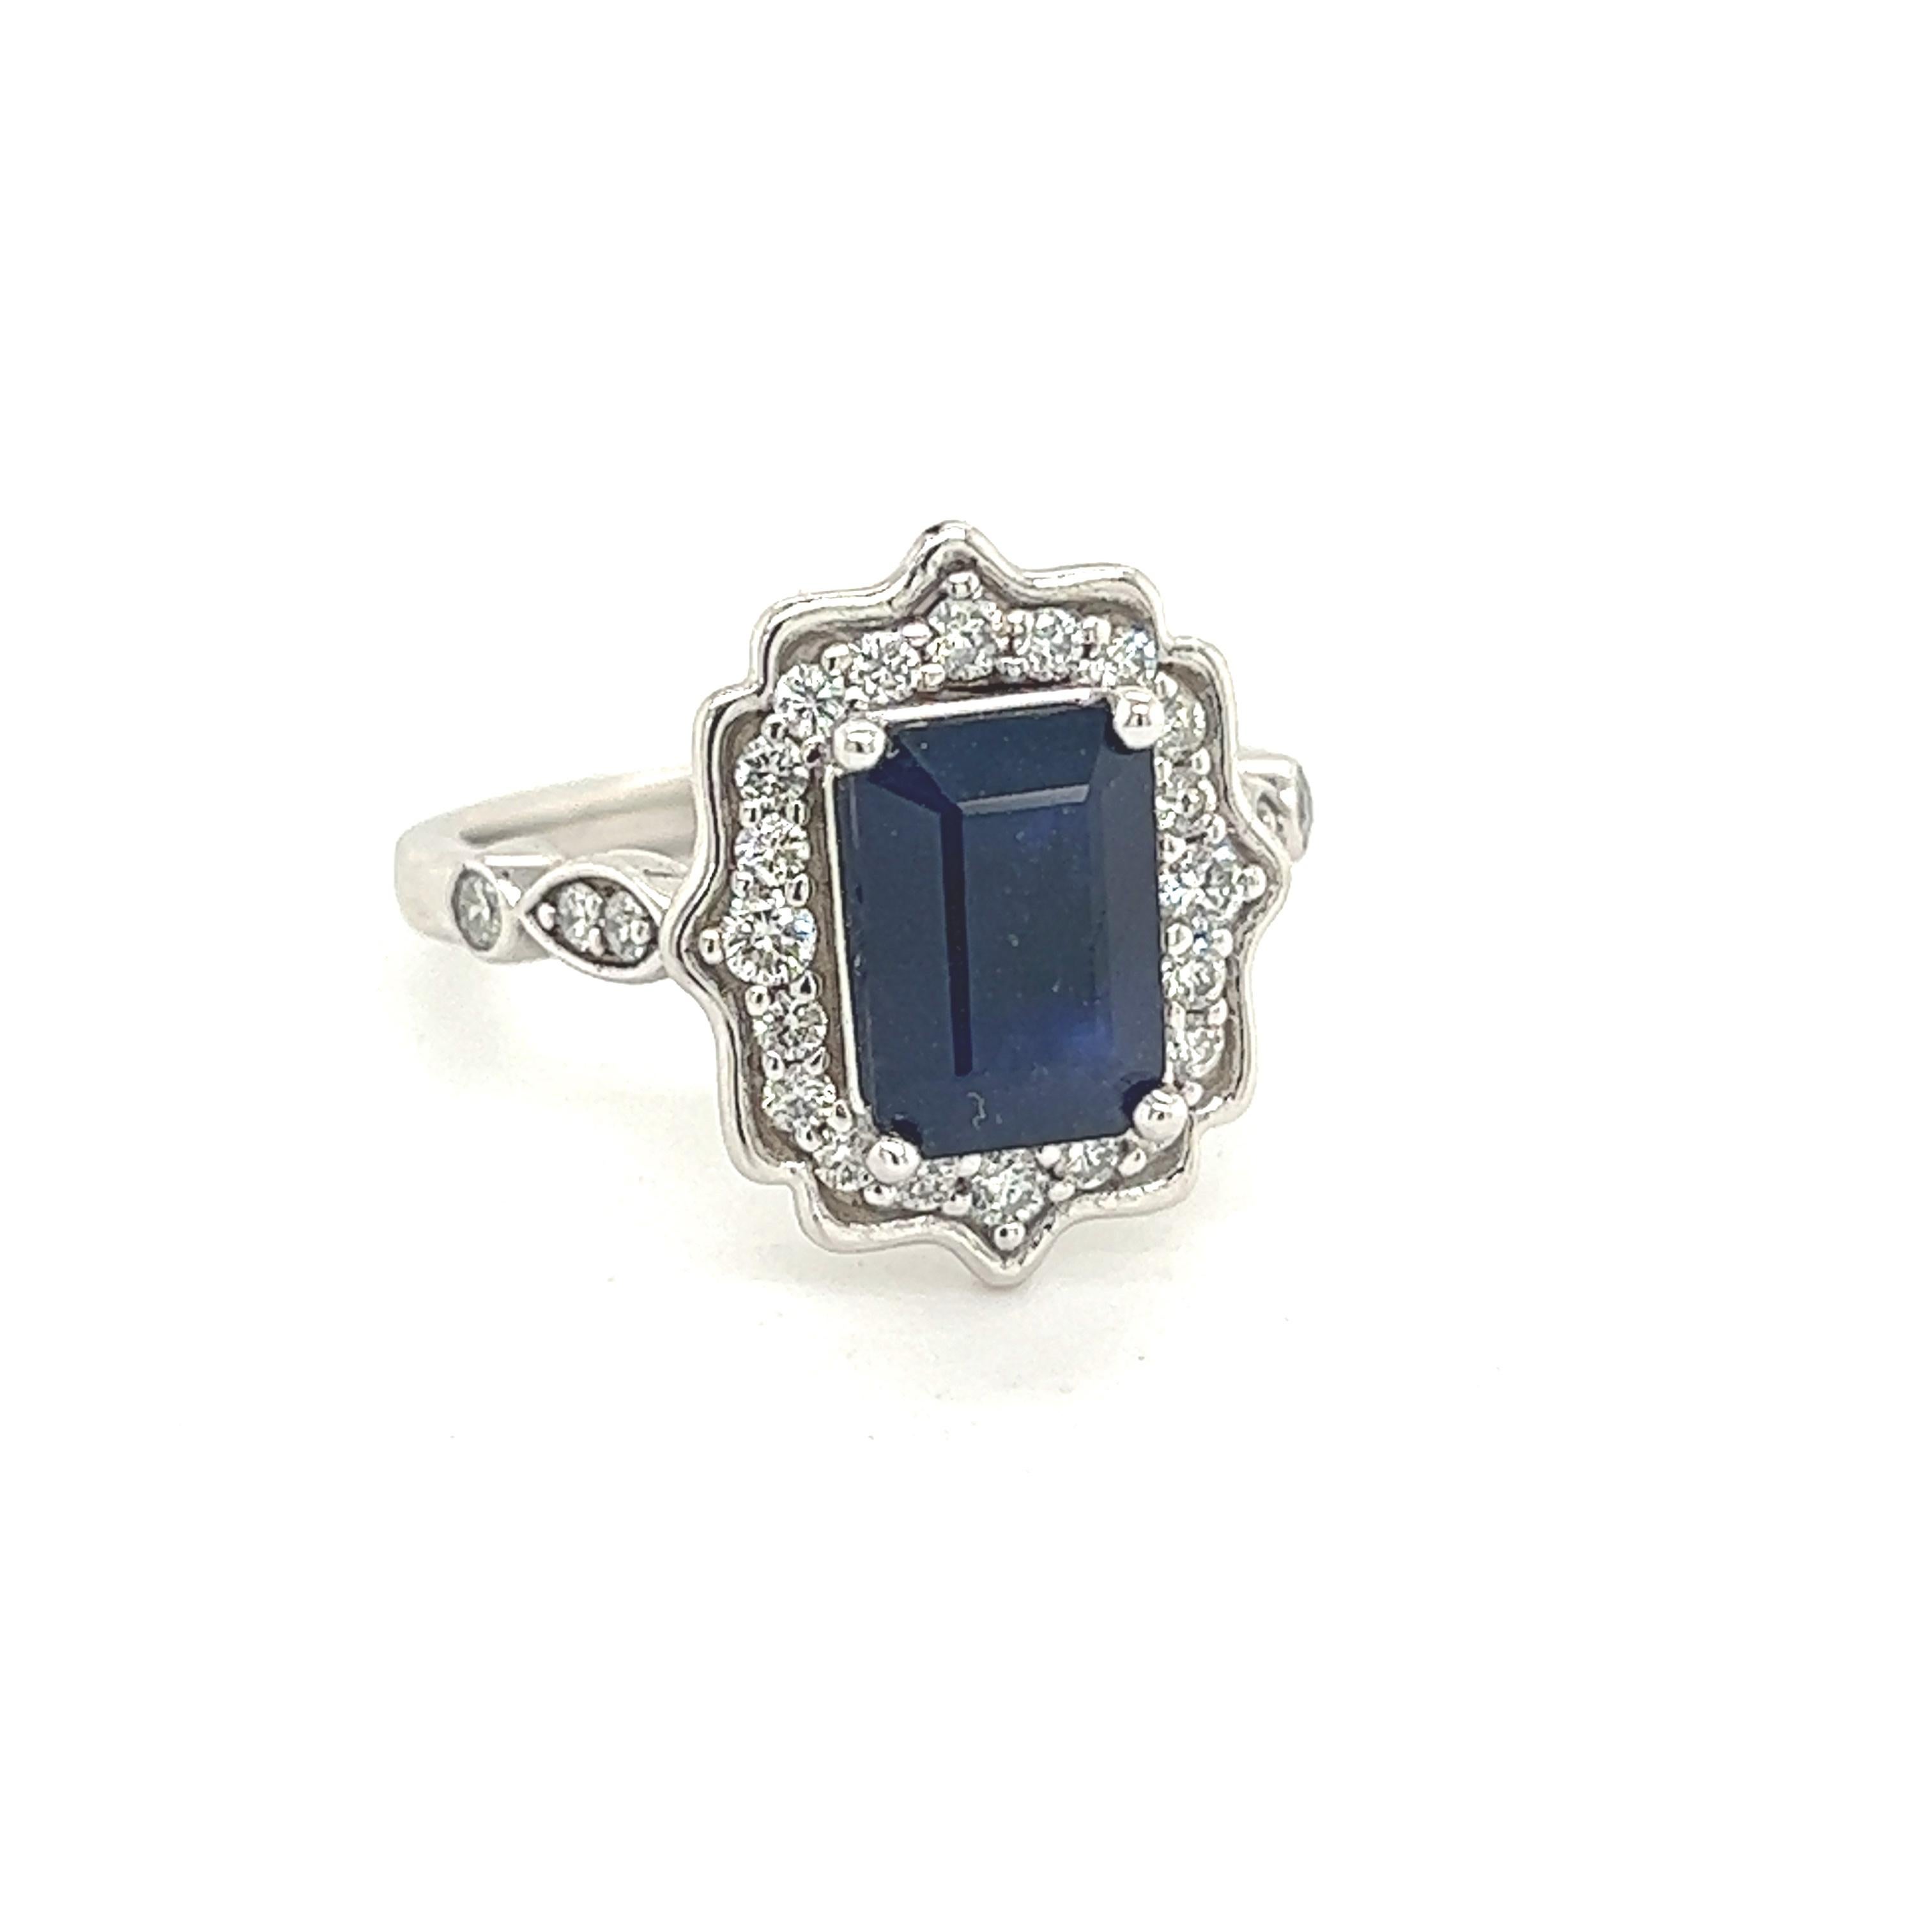 Natural Sapphire Diamond Ring 6.5 14k White Gold 3.51 TCW Certified For Sale 5